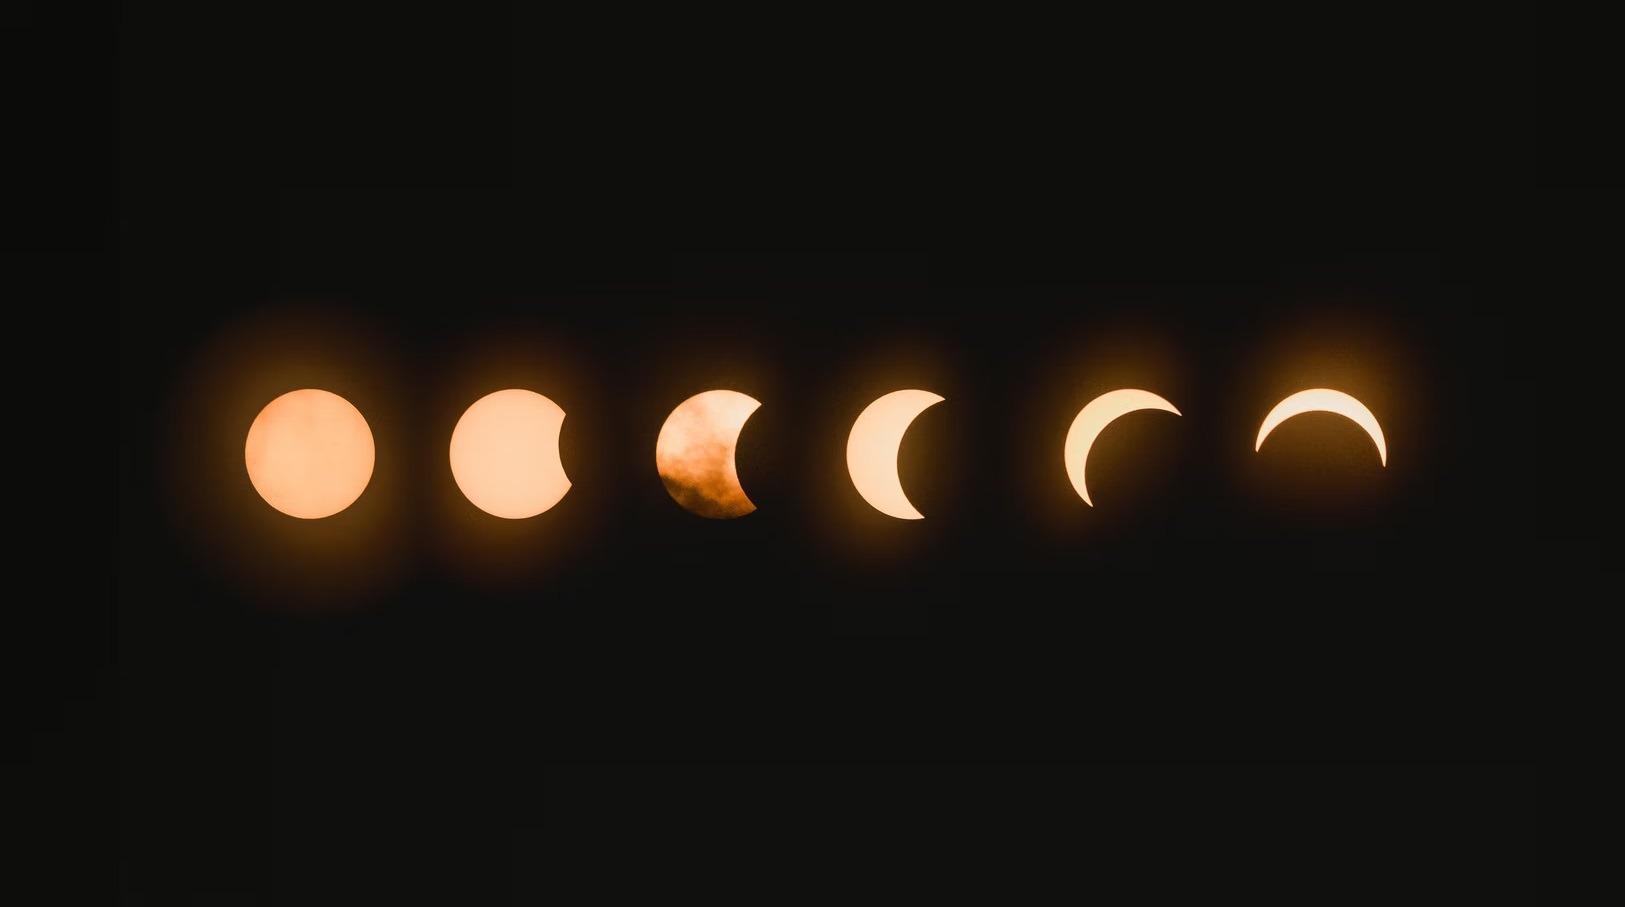 Hd Wallpapers, Eclipse Images & Pictures, Watch